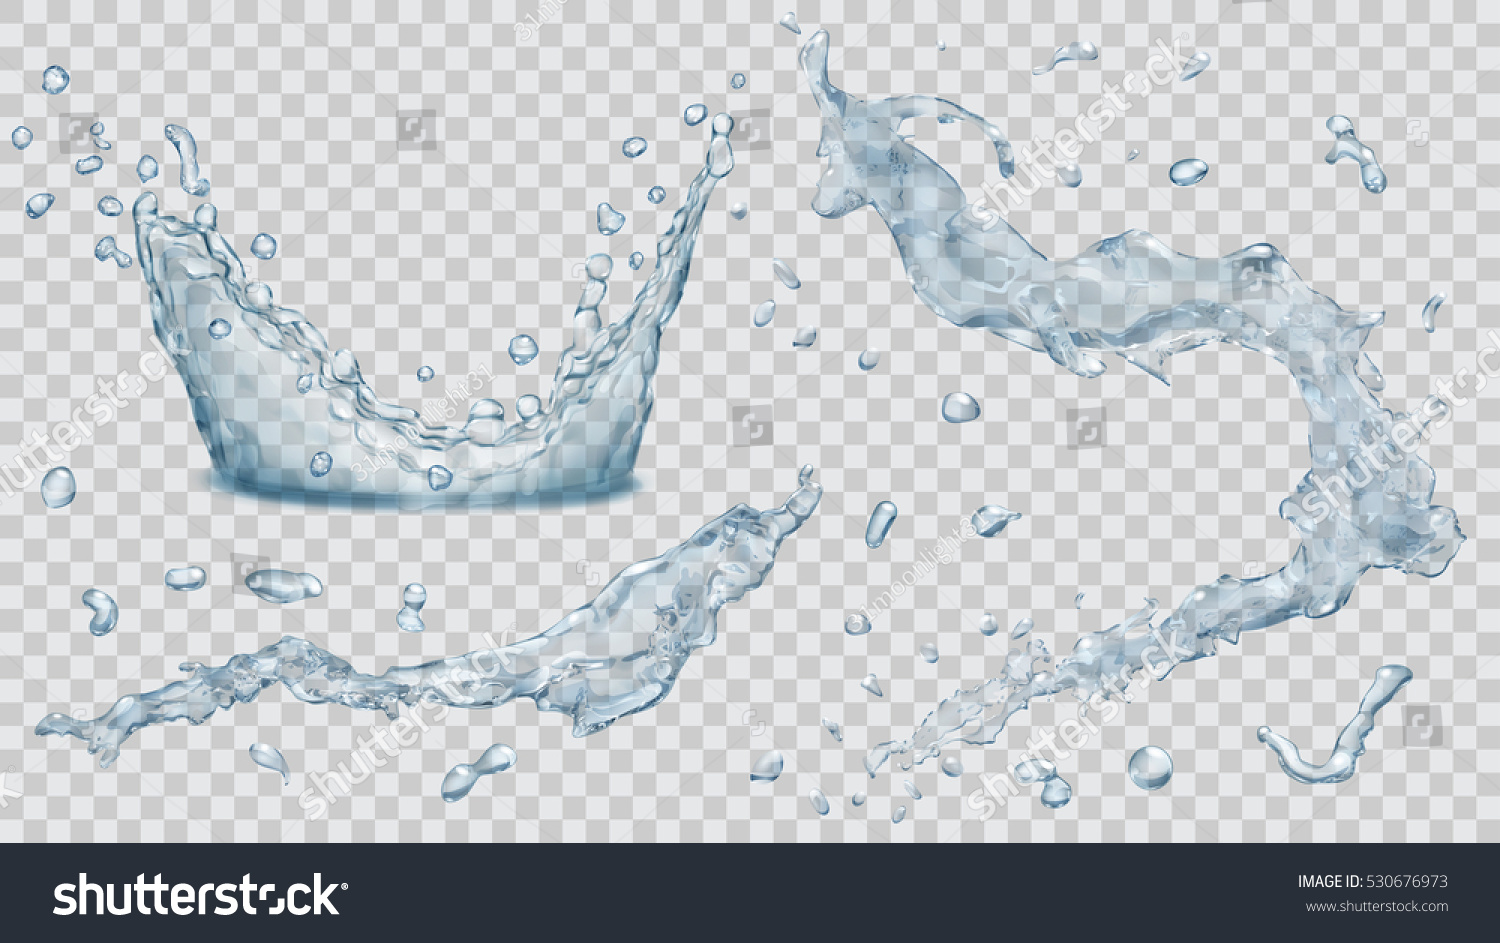 Set of translucent water splashes, drops and crown in light blue colors, isolated on transparent background. Transparency only in vector file. #530676973